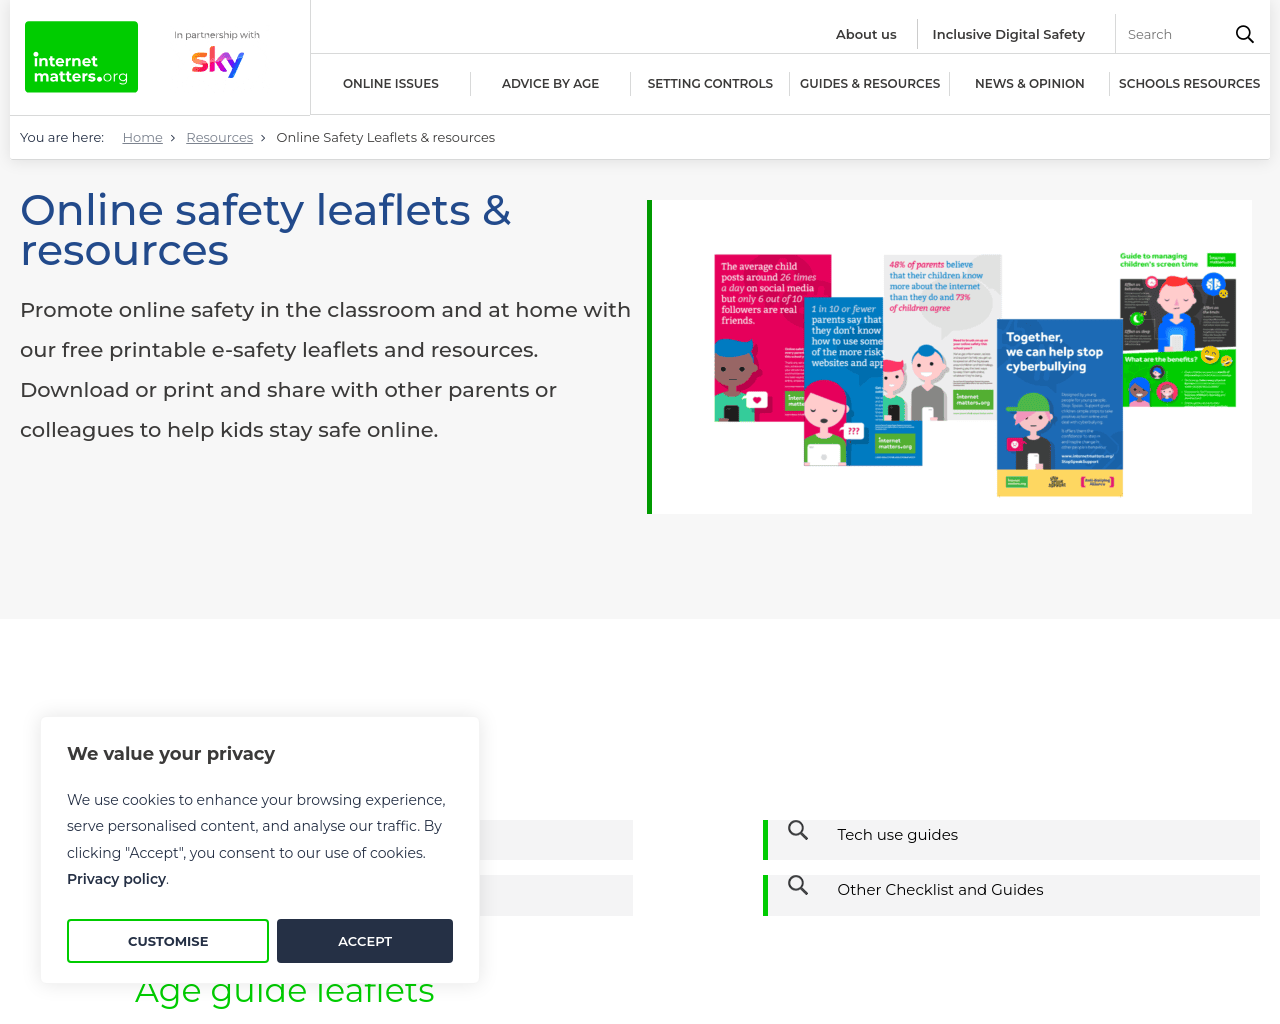 Online Safety leaflets and Resources